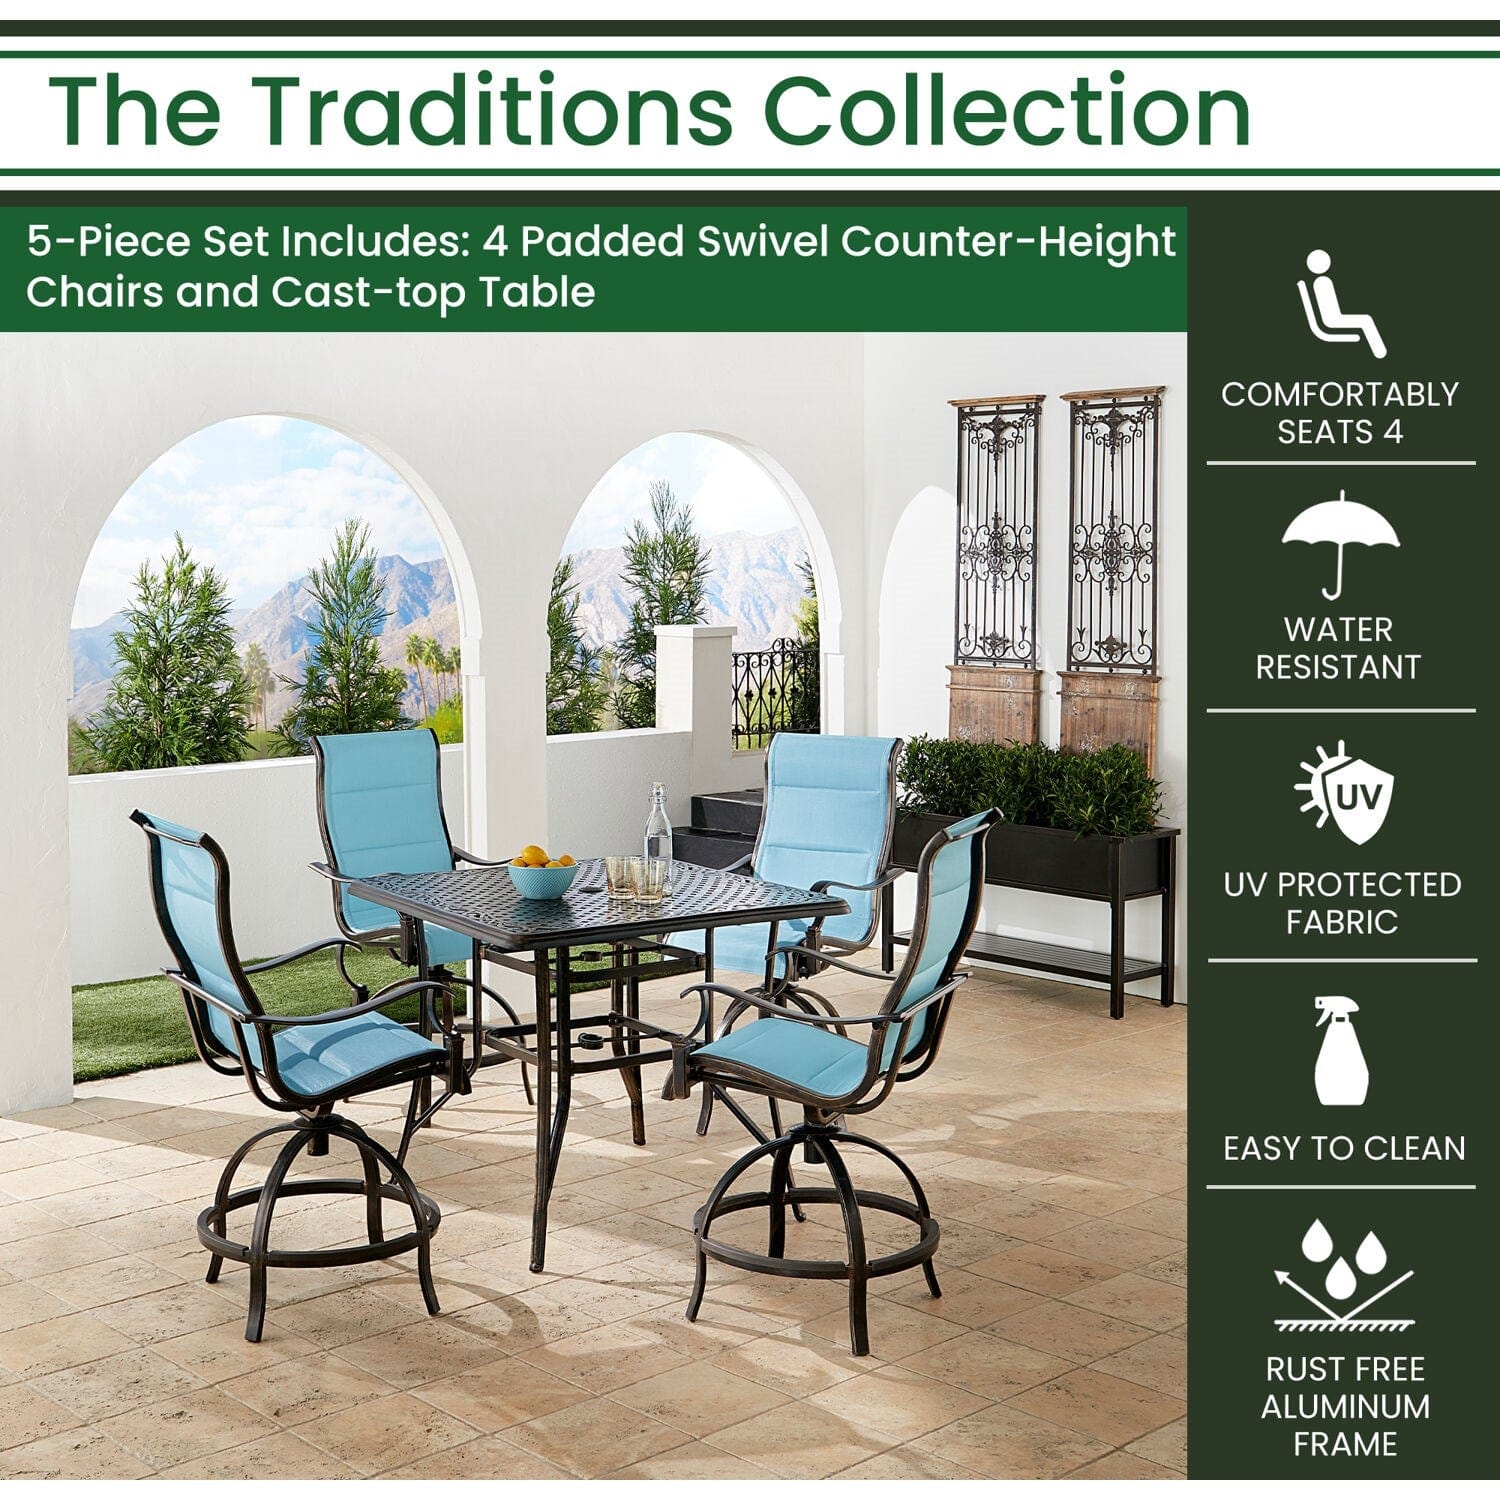 Hanover Outdoor Dining Set Hanover Traditions 5-Piece Aluminium Frame High-Dining Set in Blue with 4 Padded Swivel Counter-Height Chairs and 42-in. Cast-top Table | TRADDN5PCPDSQBR-BLU